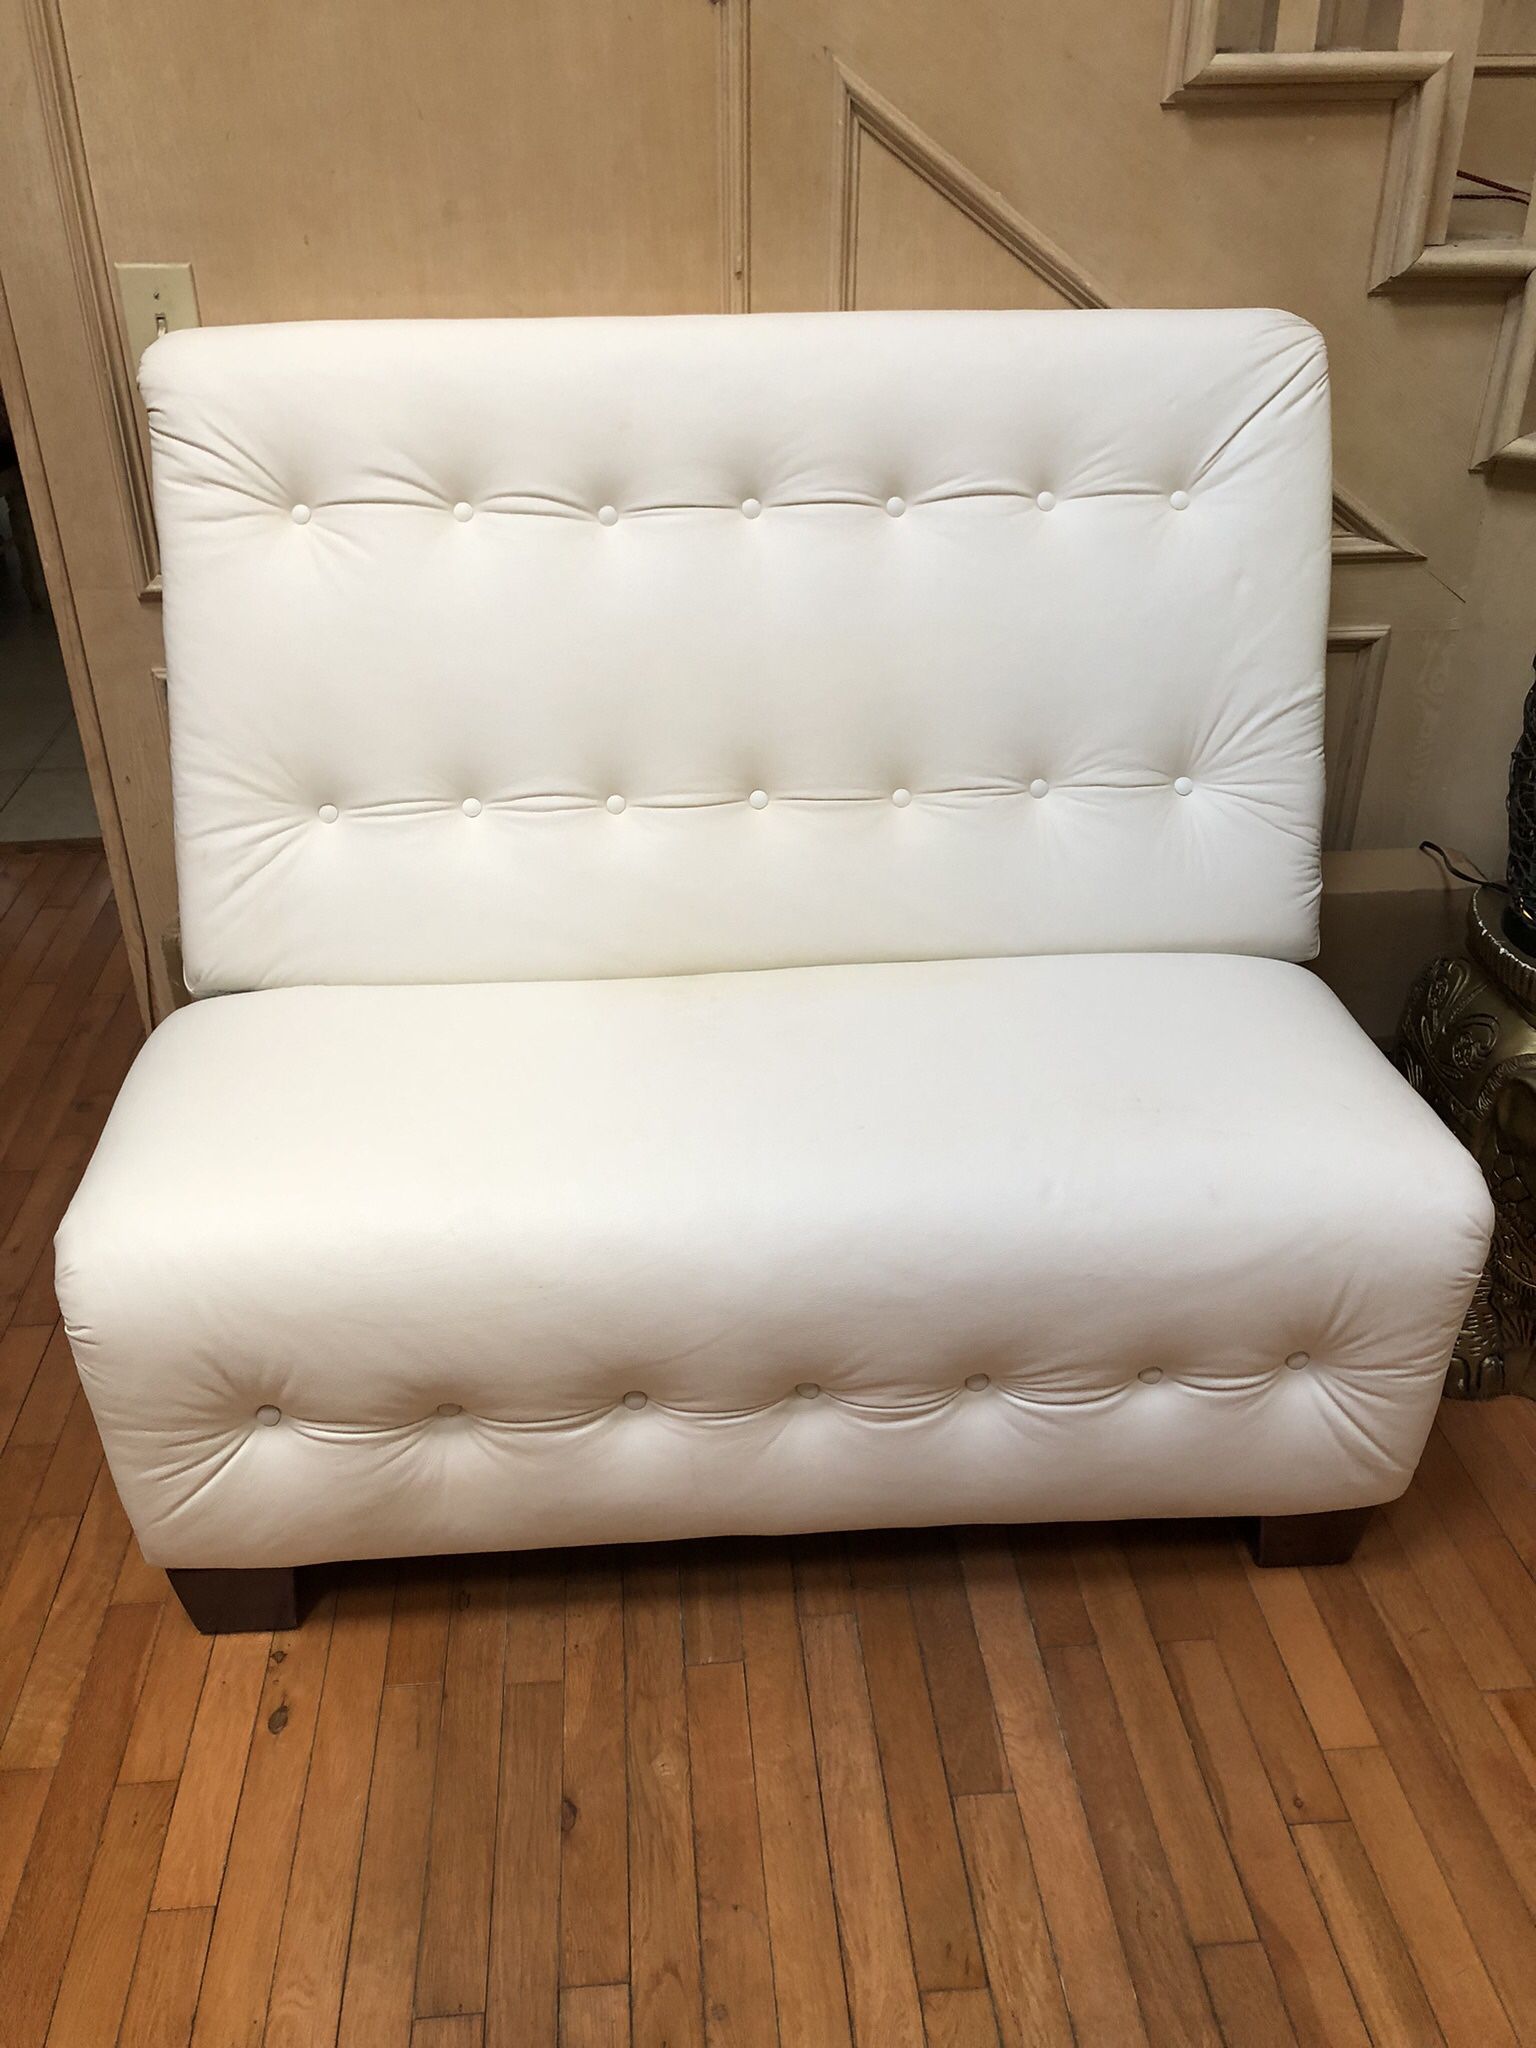 Faux Leather White Couch - **** DONATED TO A WORTHY CAUSE!****